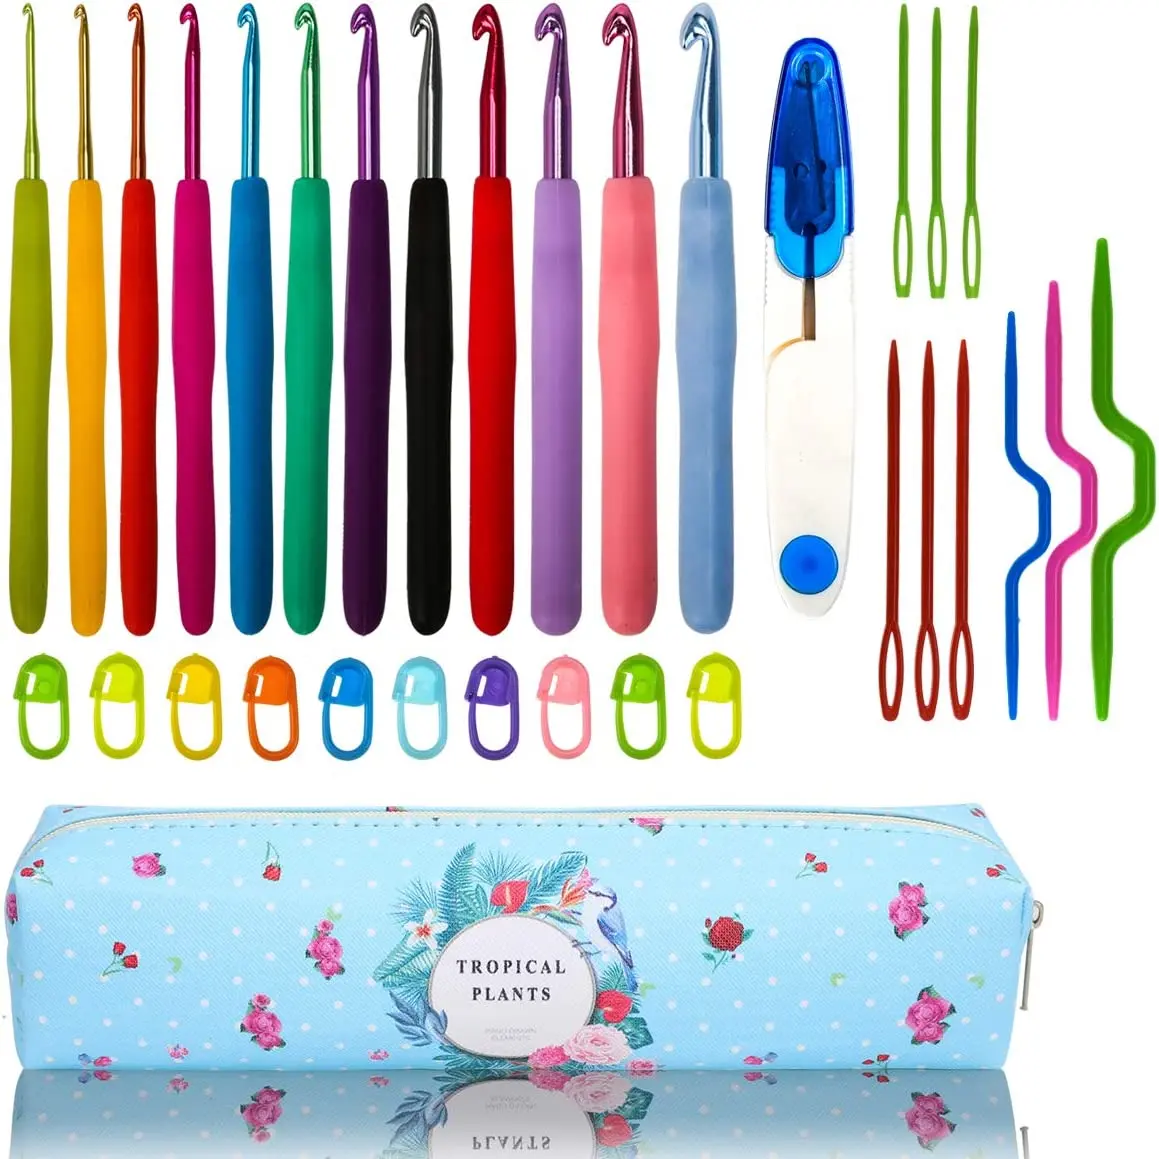 Extra Long Ergonomic Crochet Hook Set with Case Rubber Soft-Touch